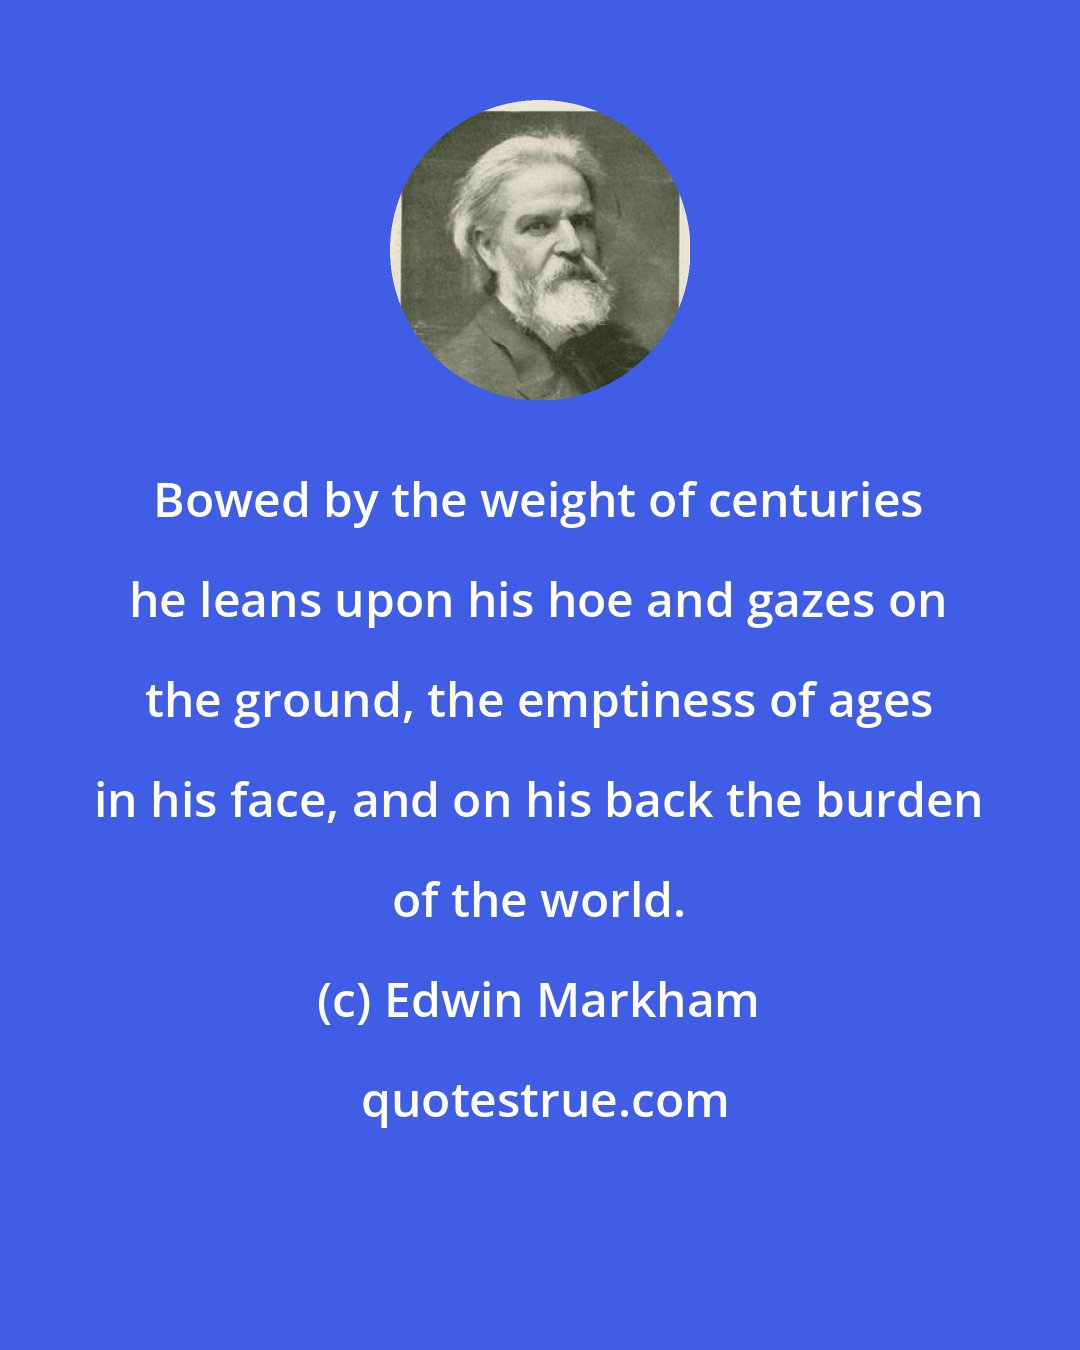 Edwin Markham: Bowed by the weight of centuries he leans upon his hoe and gazes on the ground, the emptiness of ages in his face, and on his back the burden of the world.